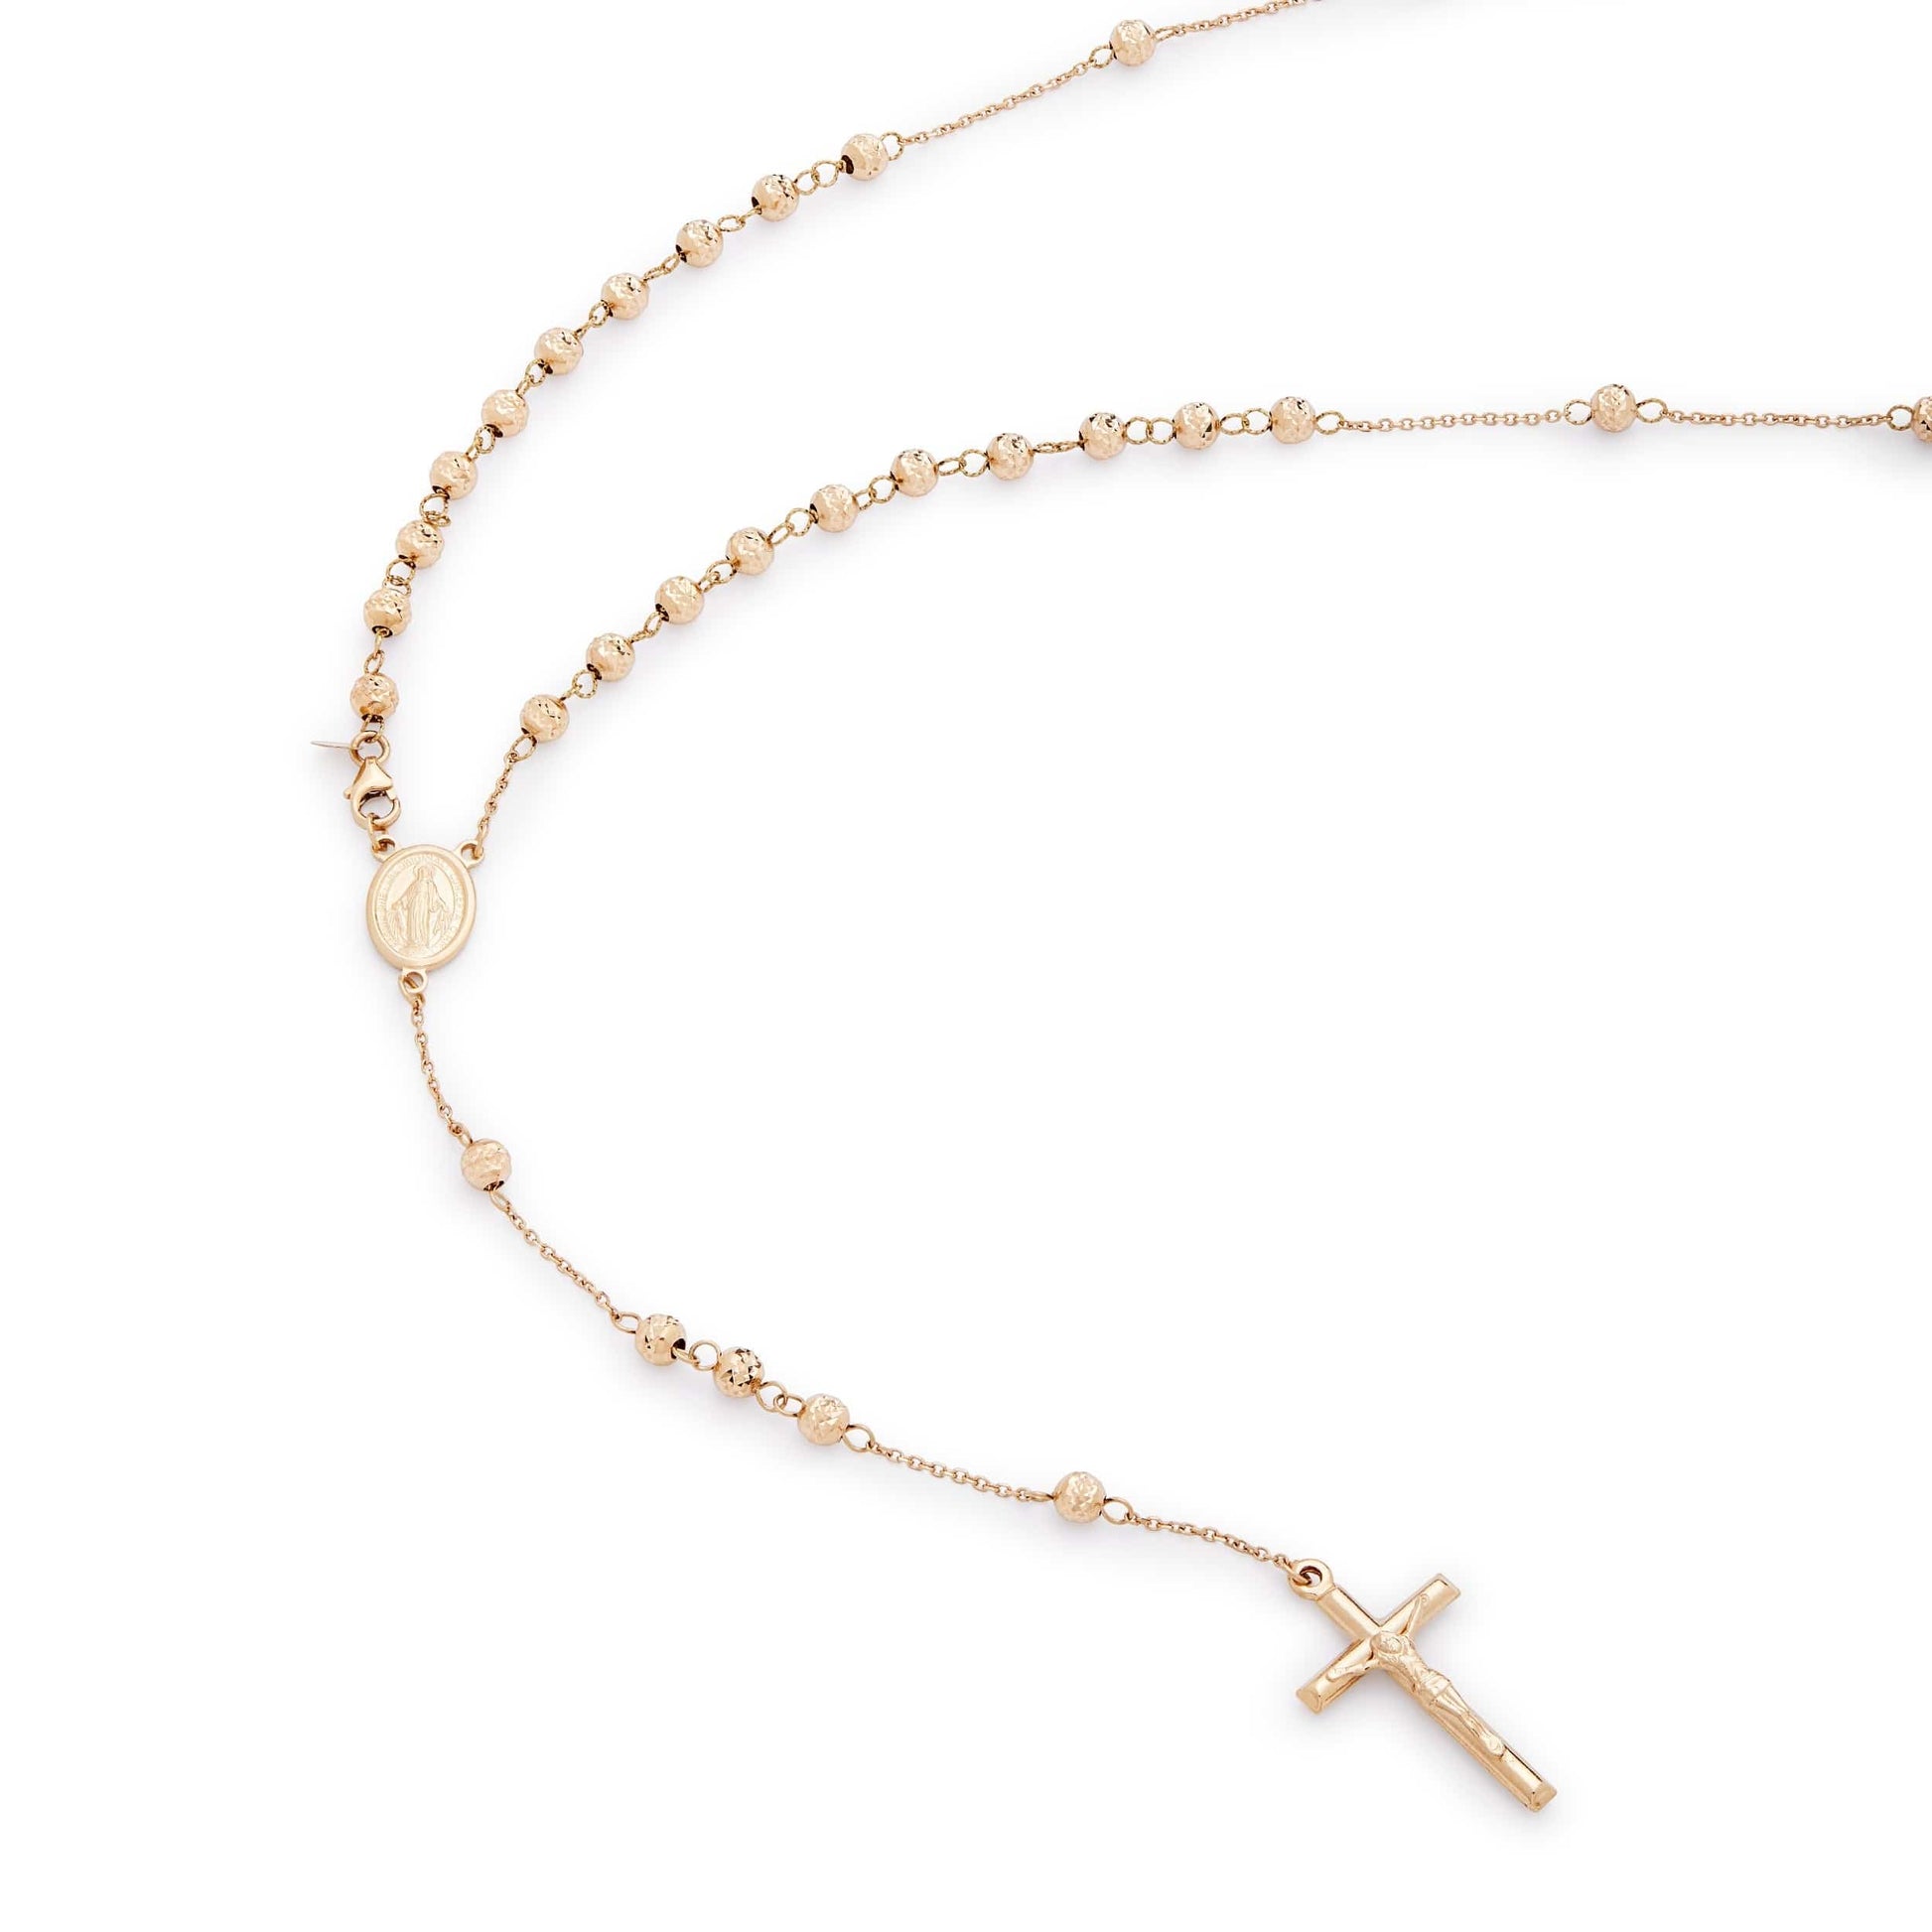 MONDO CATTOLICO Prayer Beads 43.3 cm (17 in) / 4.0 mm (0.15 in) Five Decades Rosary in Yellow Gold